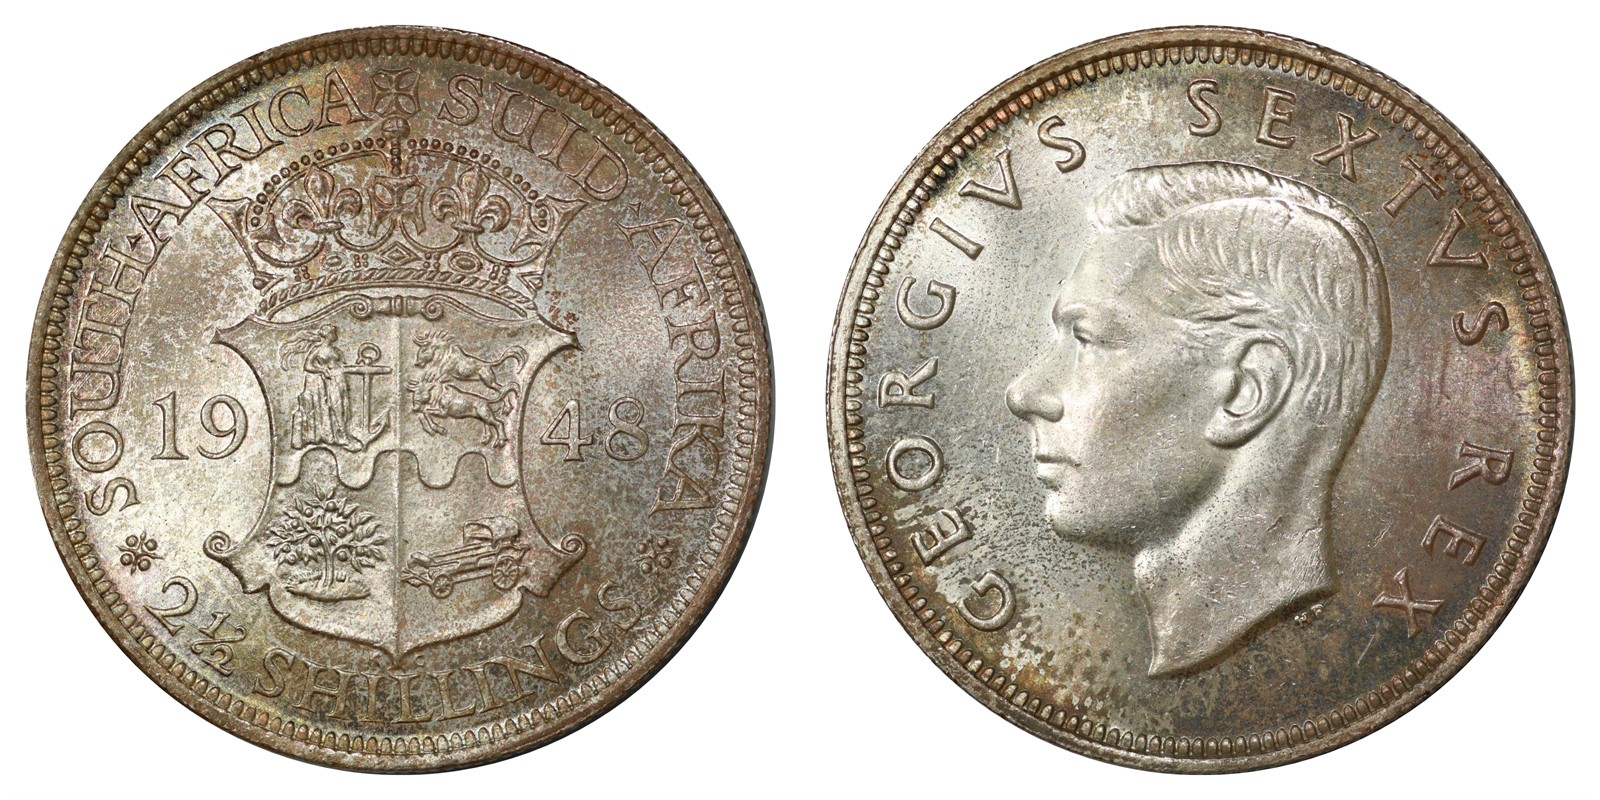 South Africa- George VI - 2 Shillings 1948 - Proof *